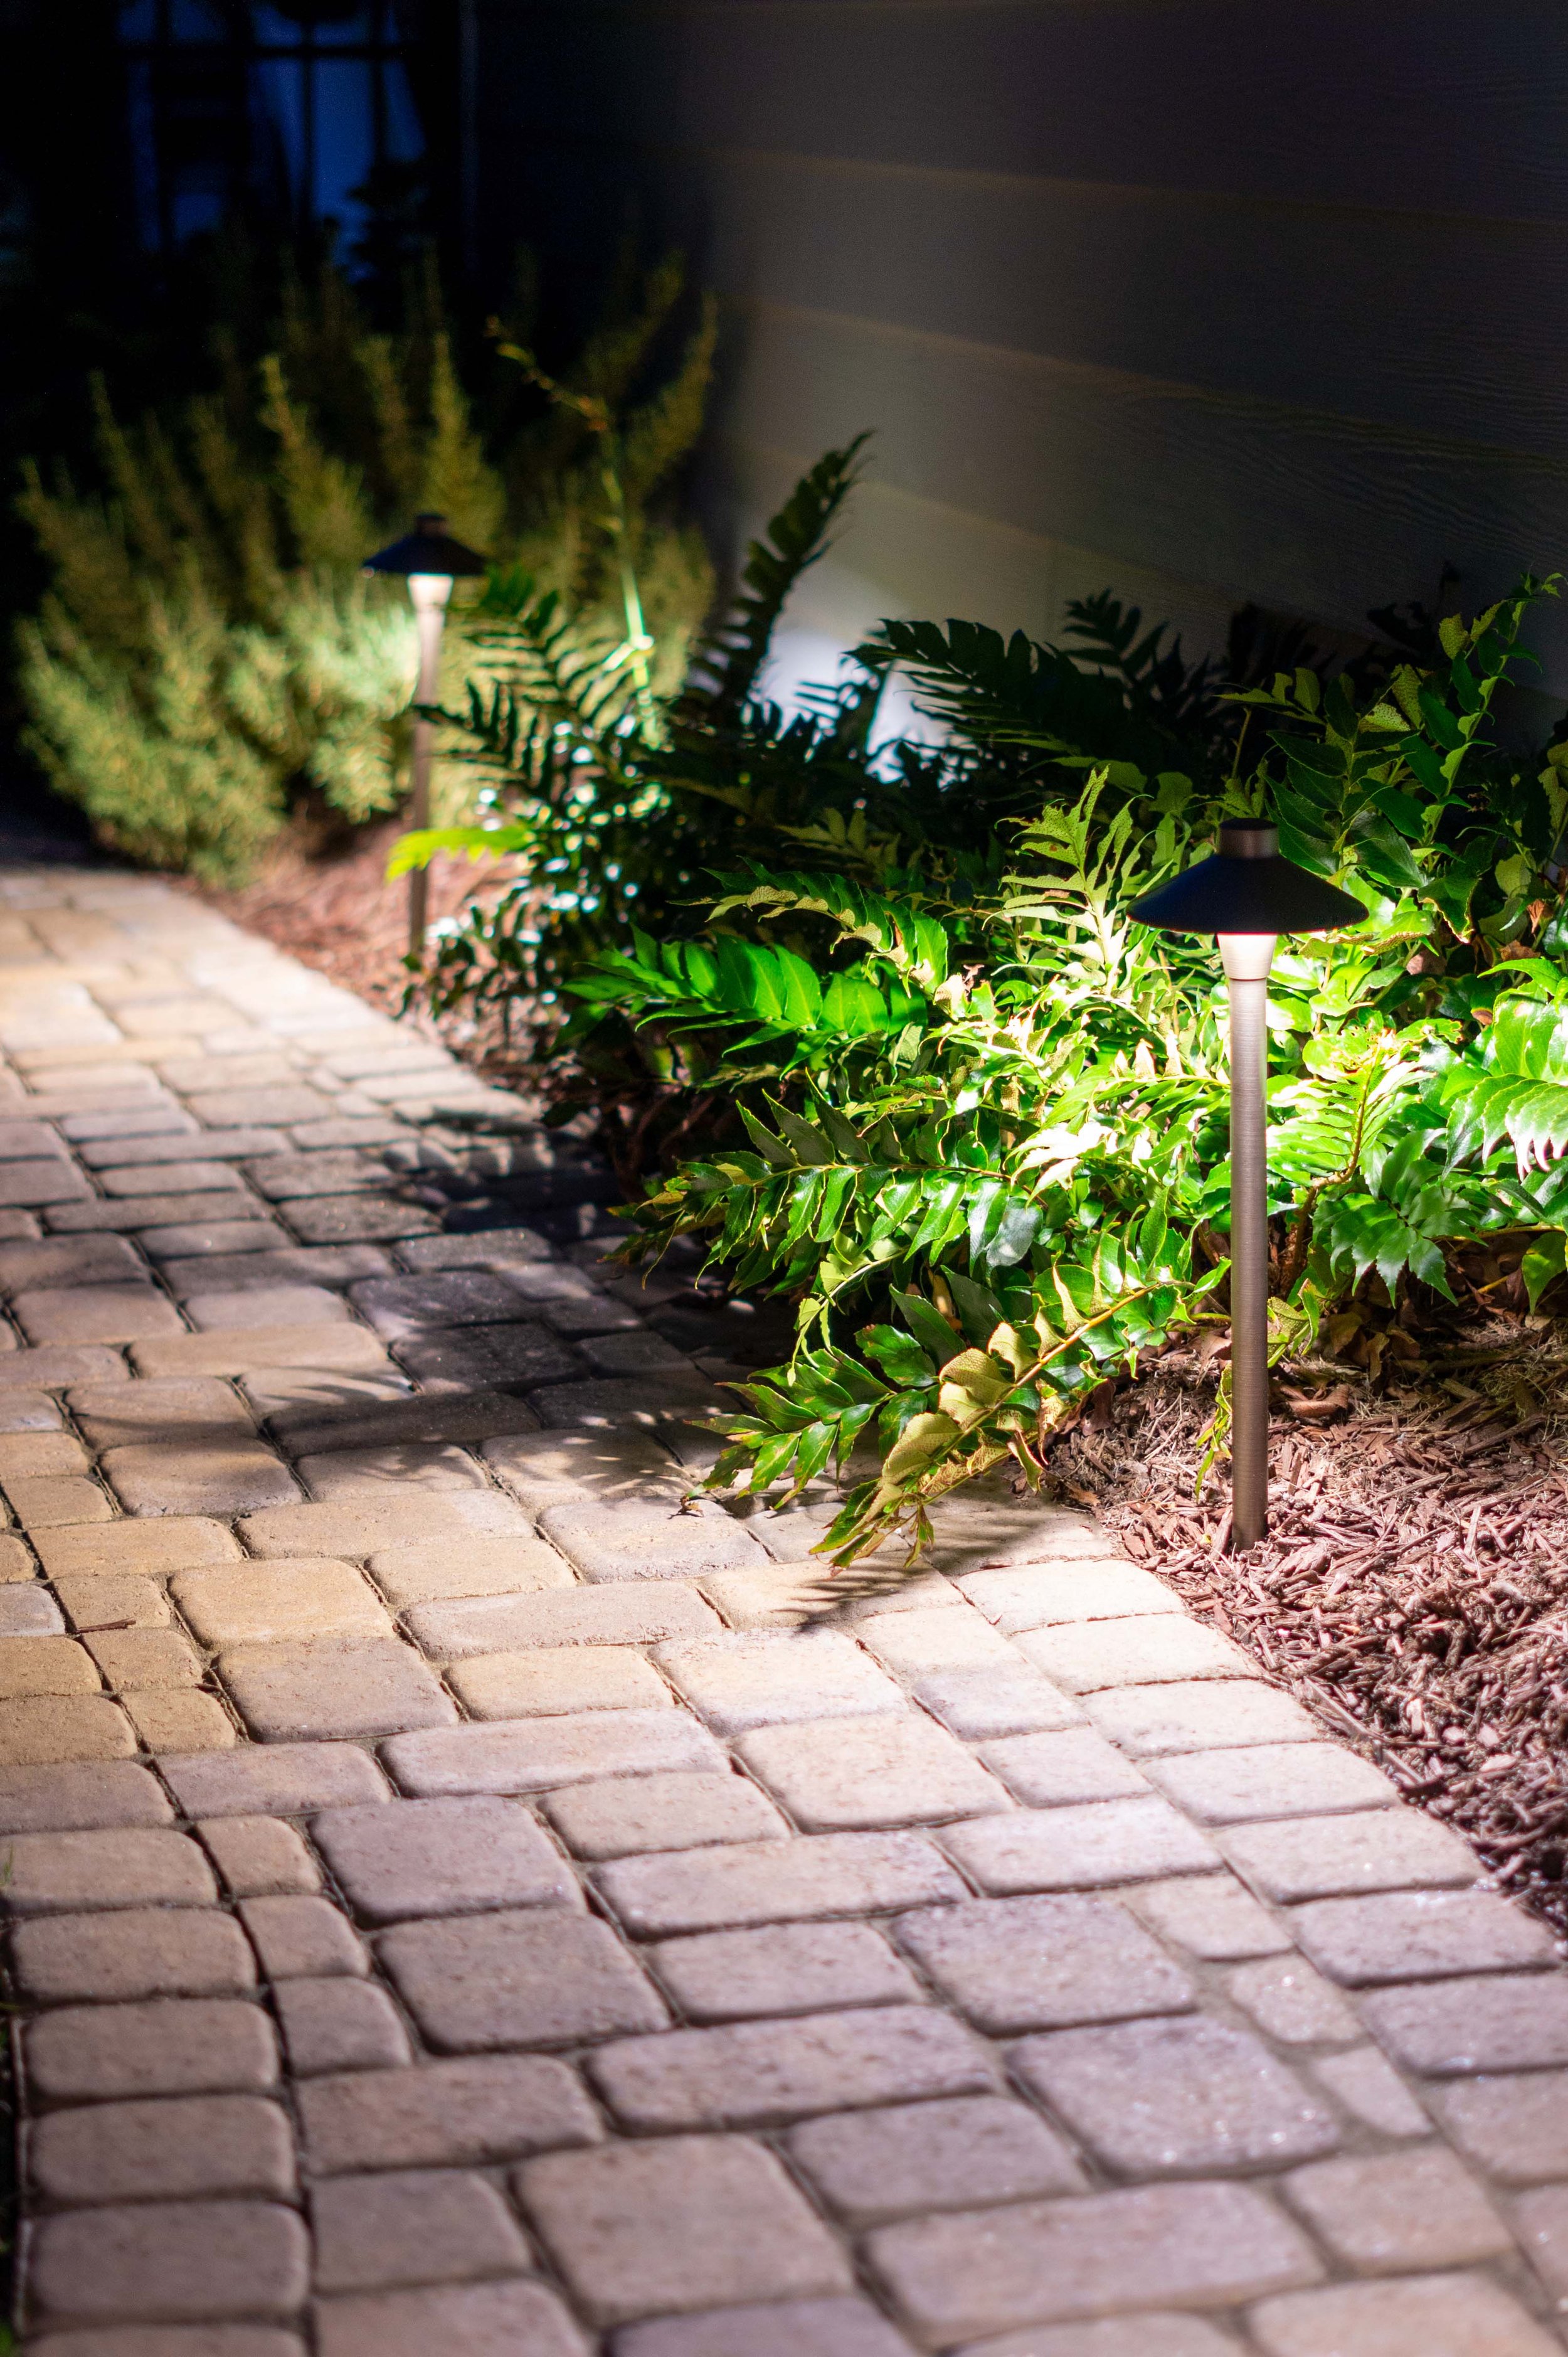  Path lights illuminating a stamped concrete pathway with a landscaped edge.  